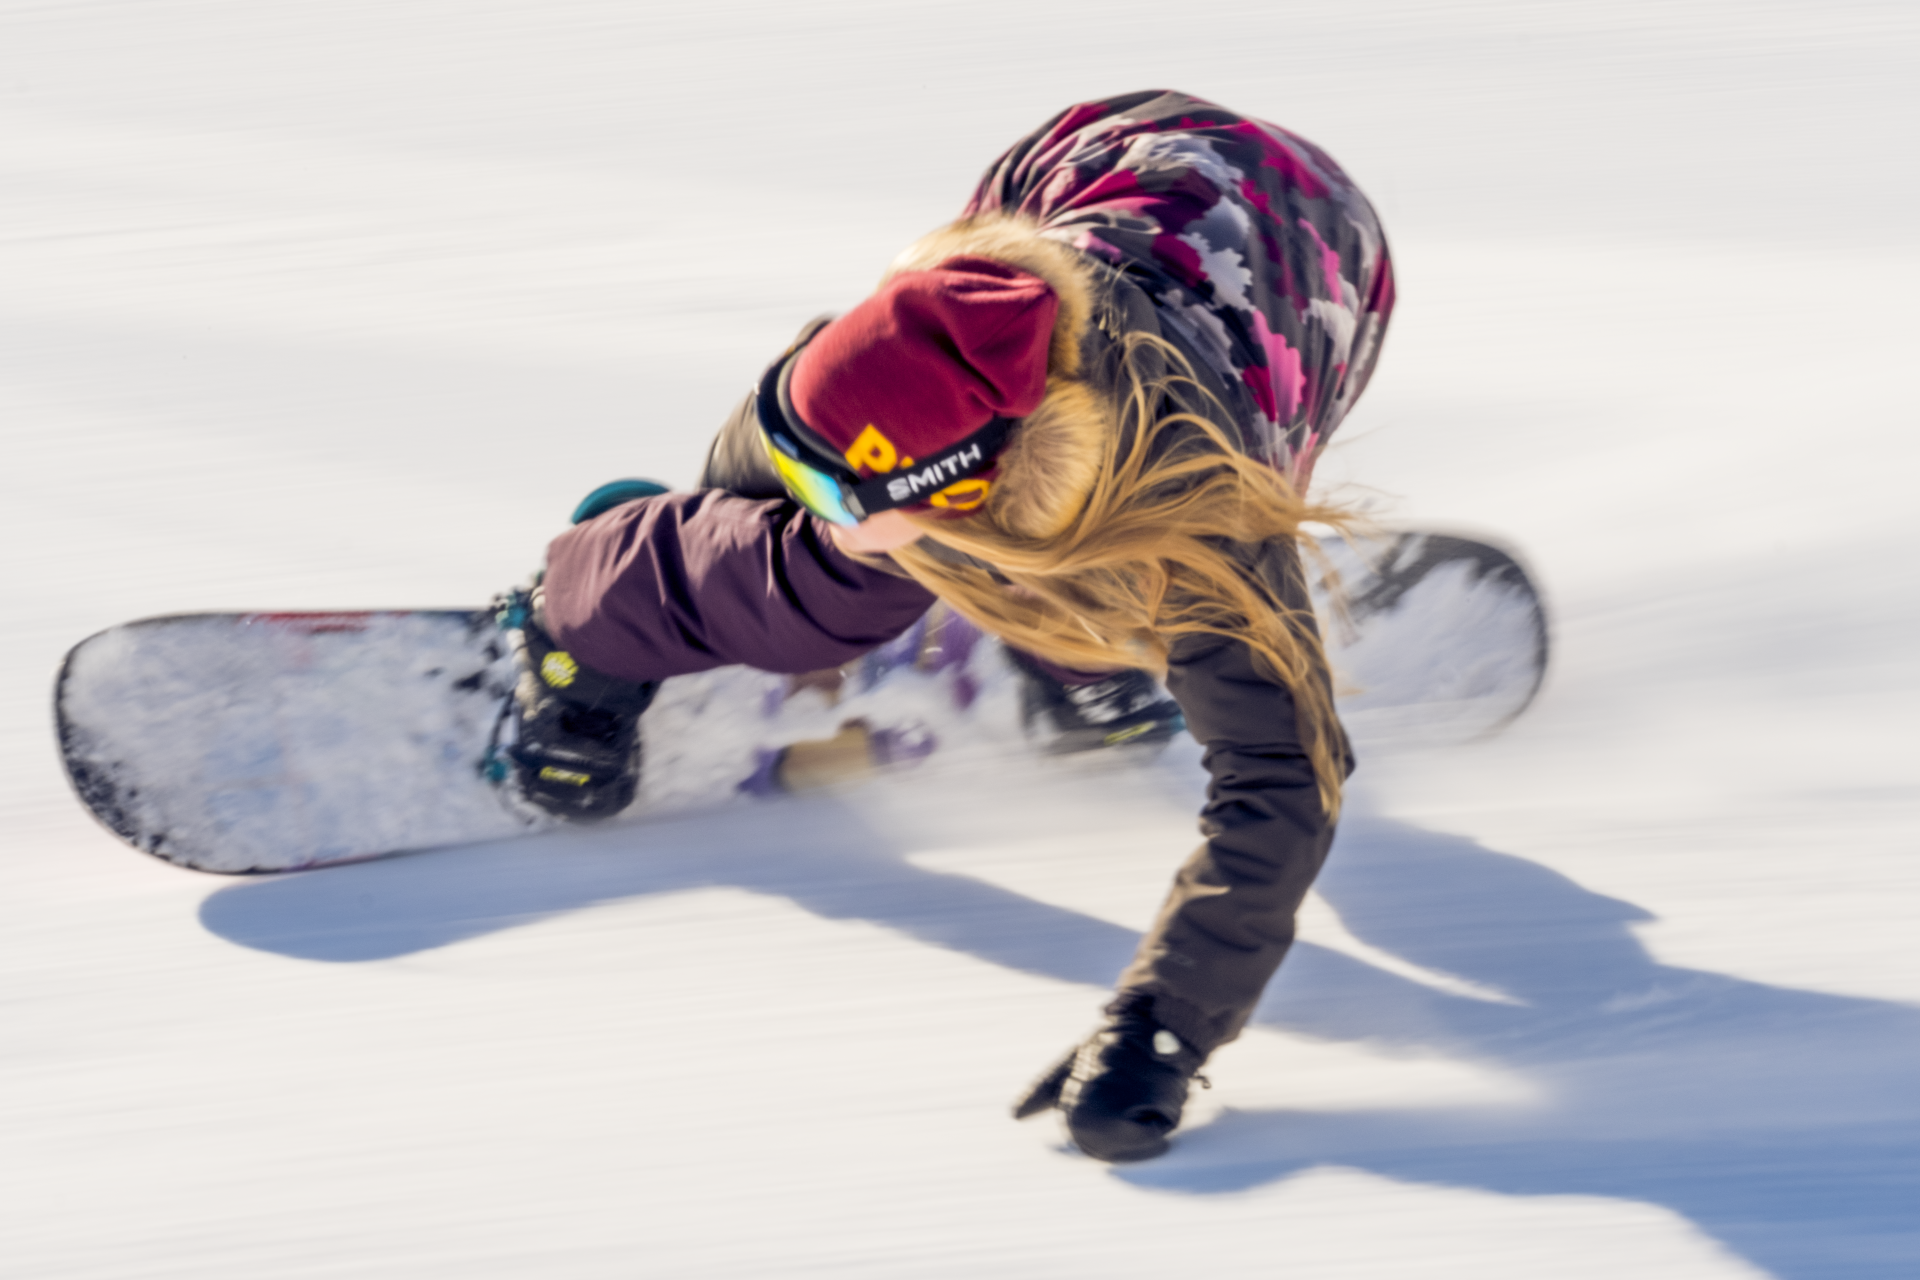 The best women’s ski and snowboard gear for winter 2018/2019